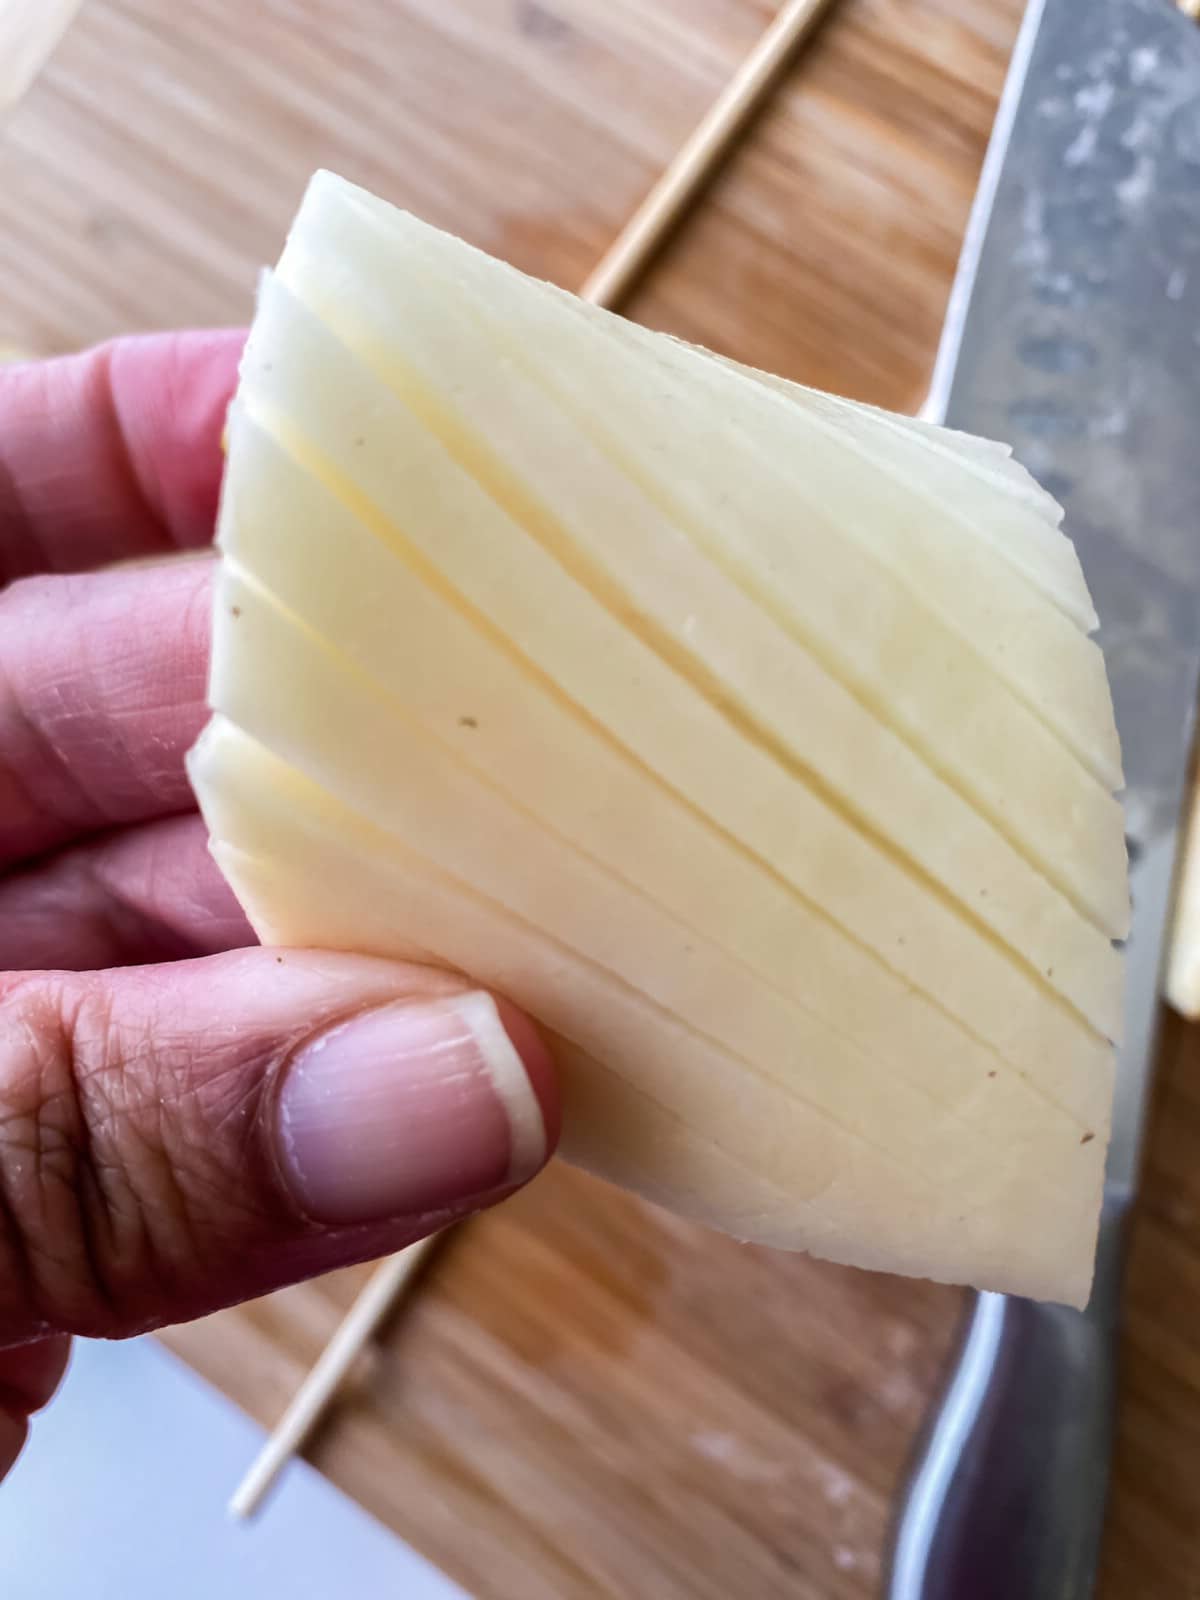 Hand holding potato slices above cutting board